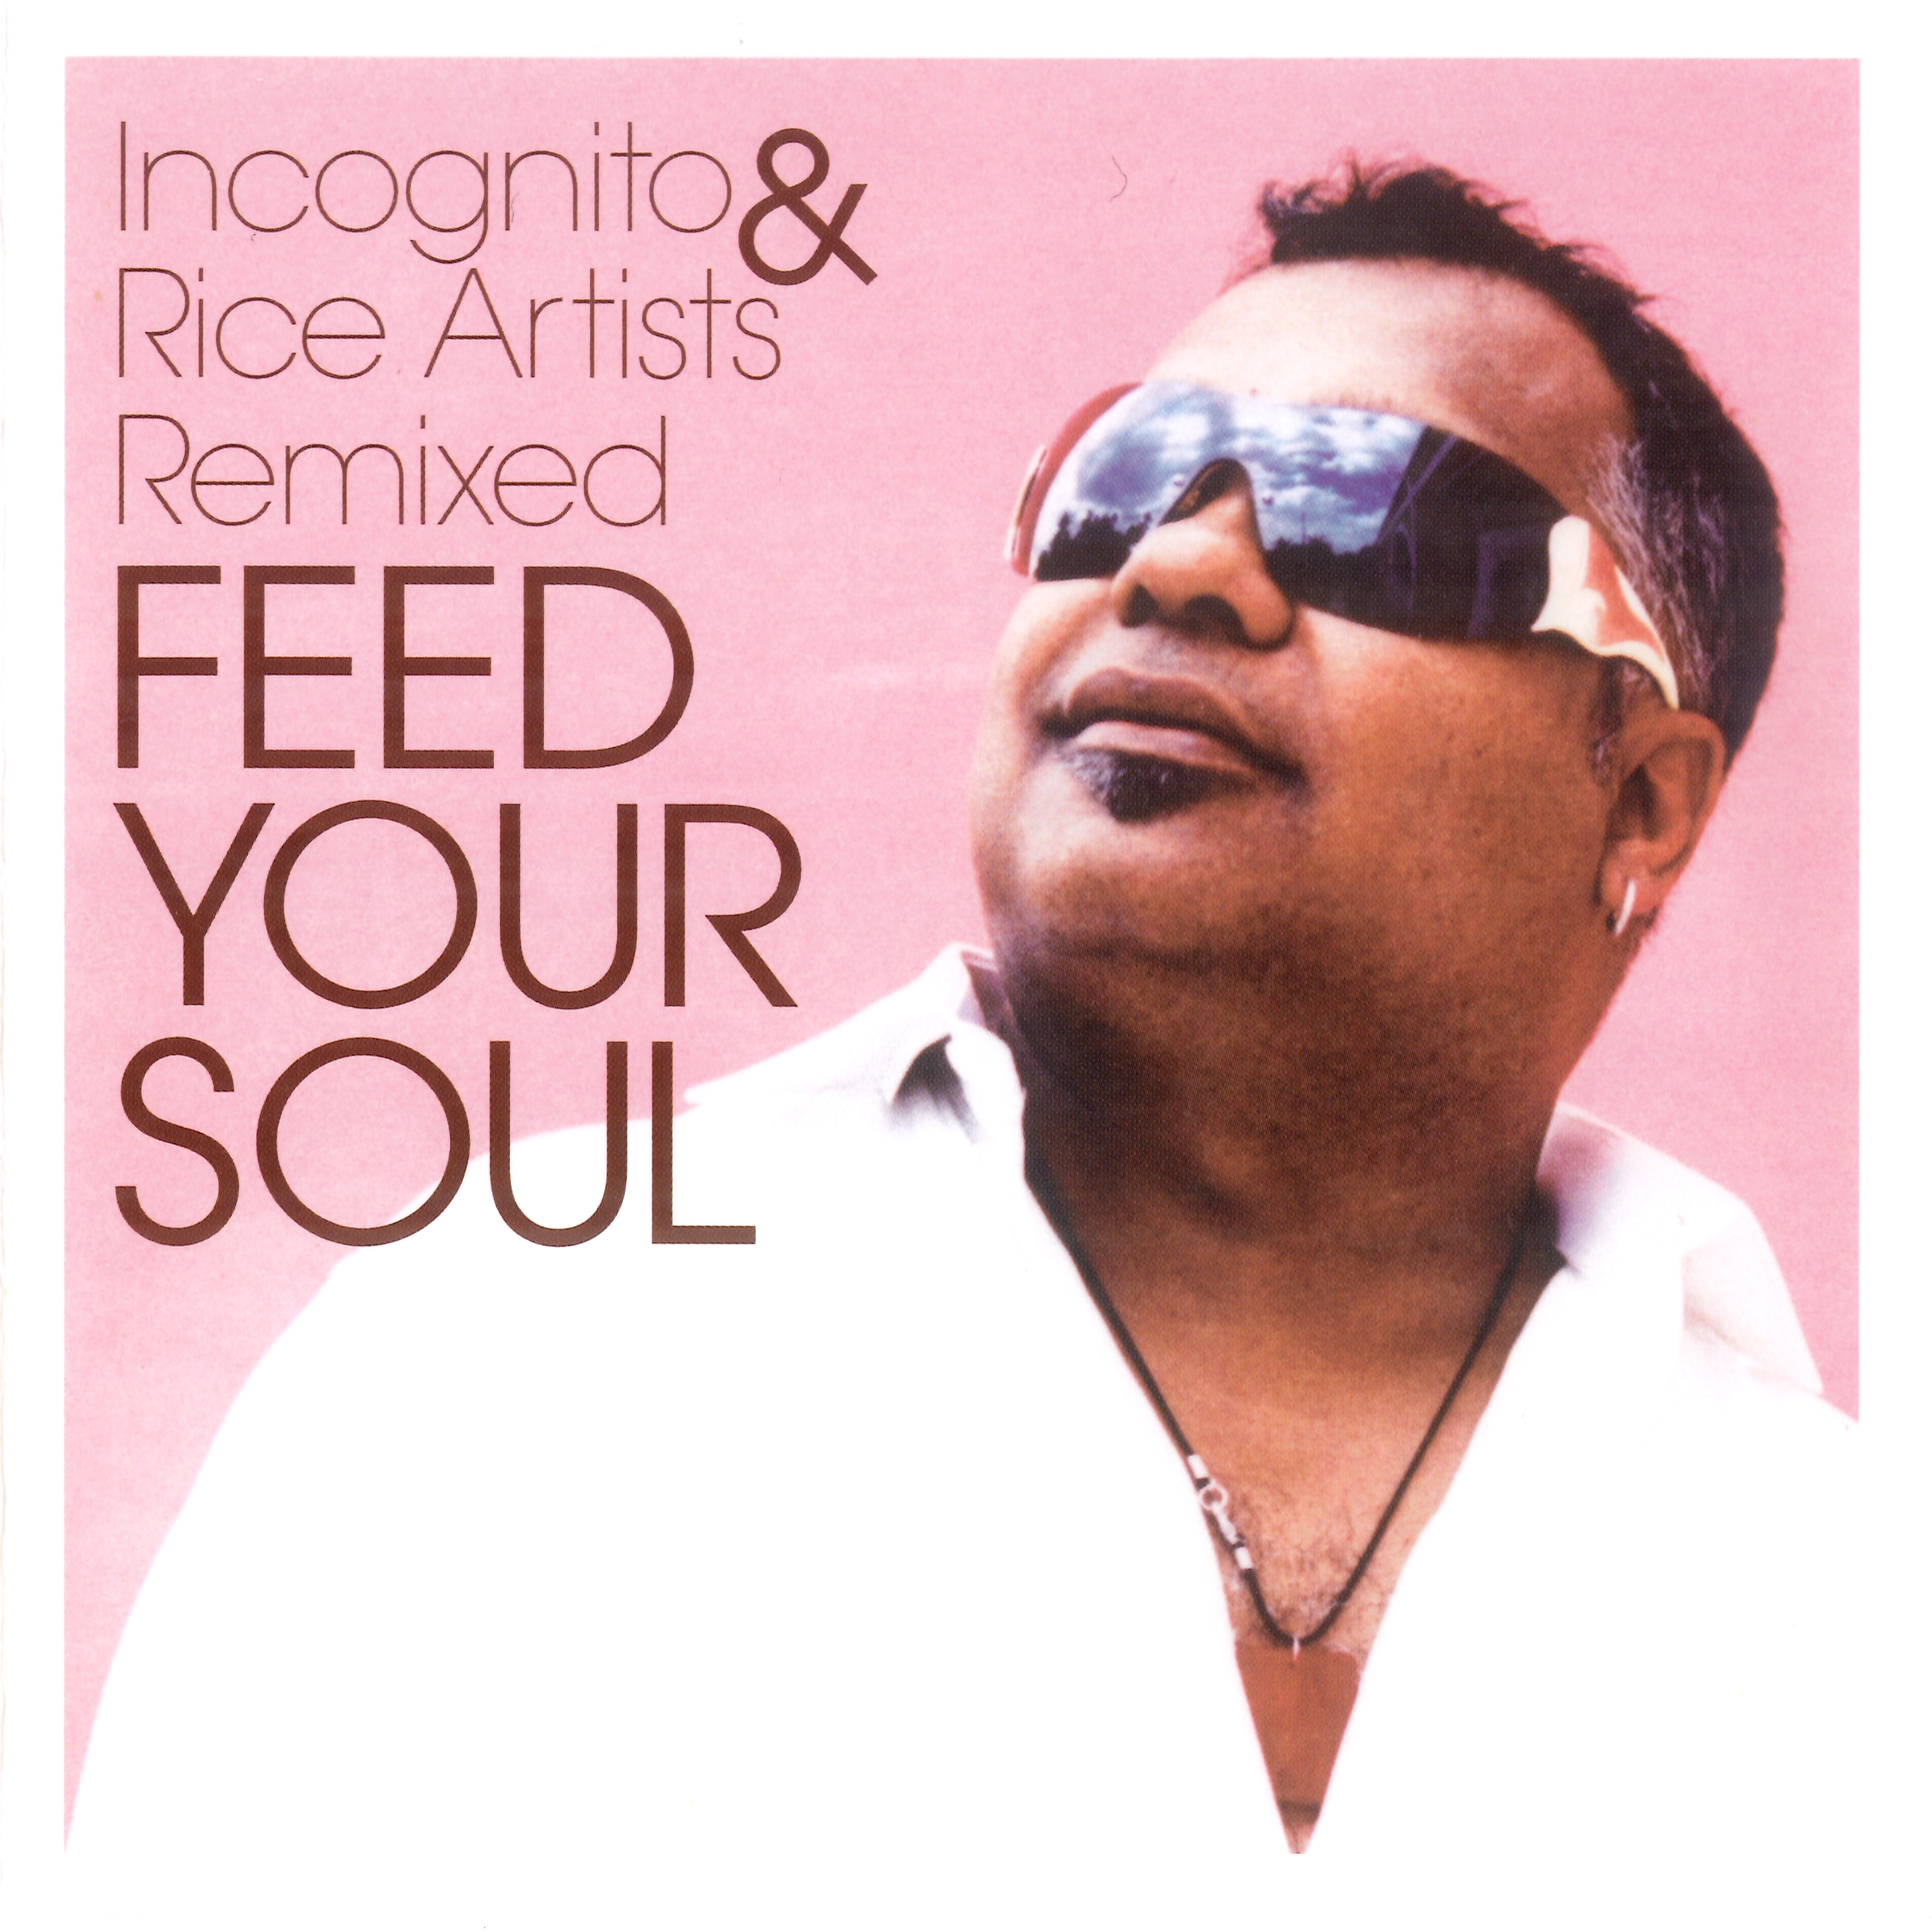 FEED YOUR SOUL - INCOGNITO & RICE ARTISTS REMIXED